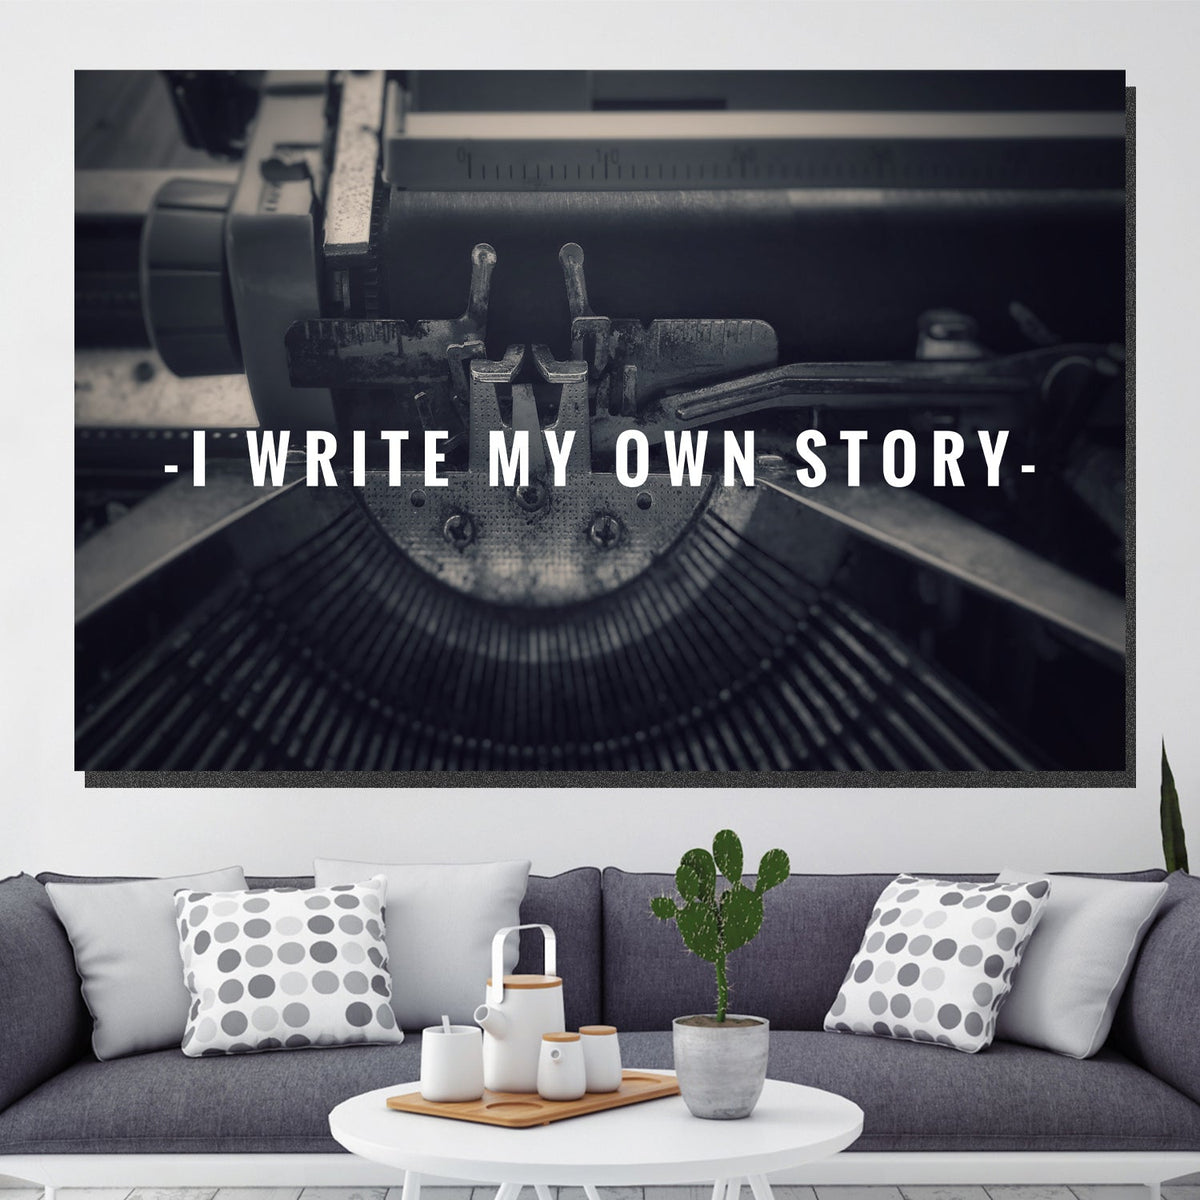 https://cdn.shopify.com/s/files/1/0387/9986/8044/products/IWriteMyOwnStoryCanvasArtprintStretched-2.jpg